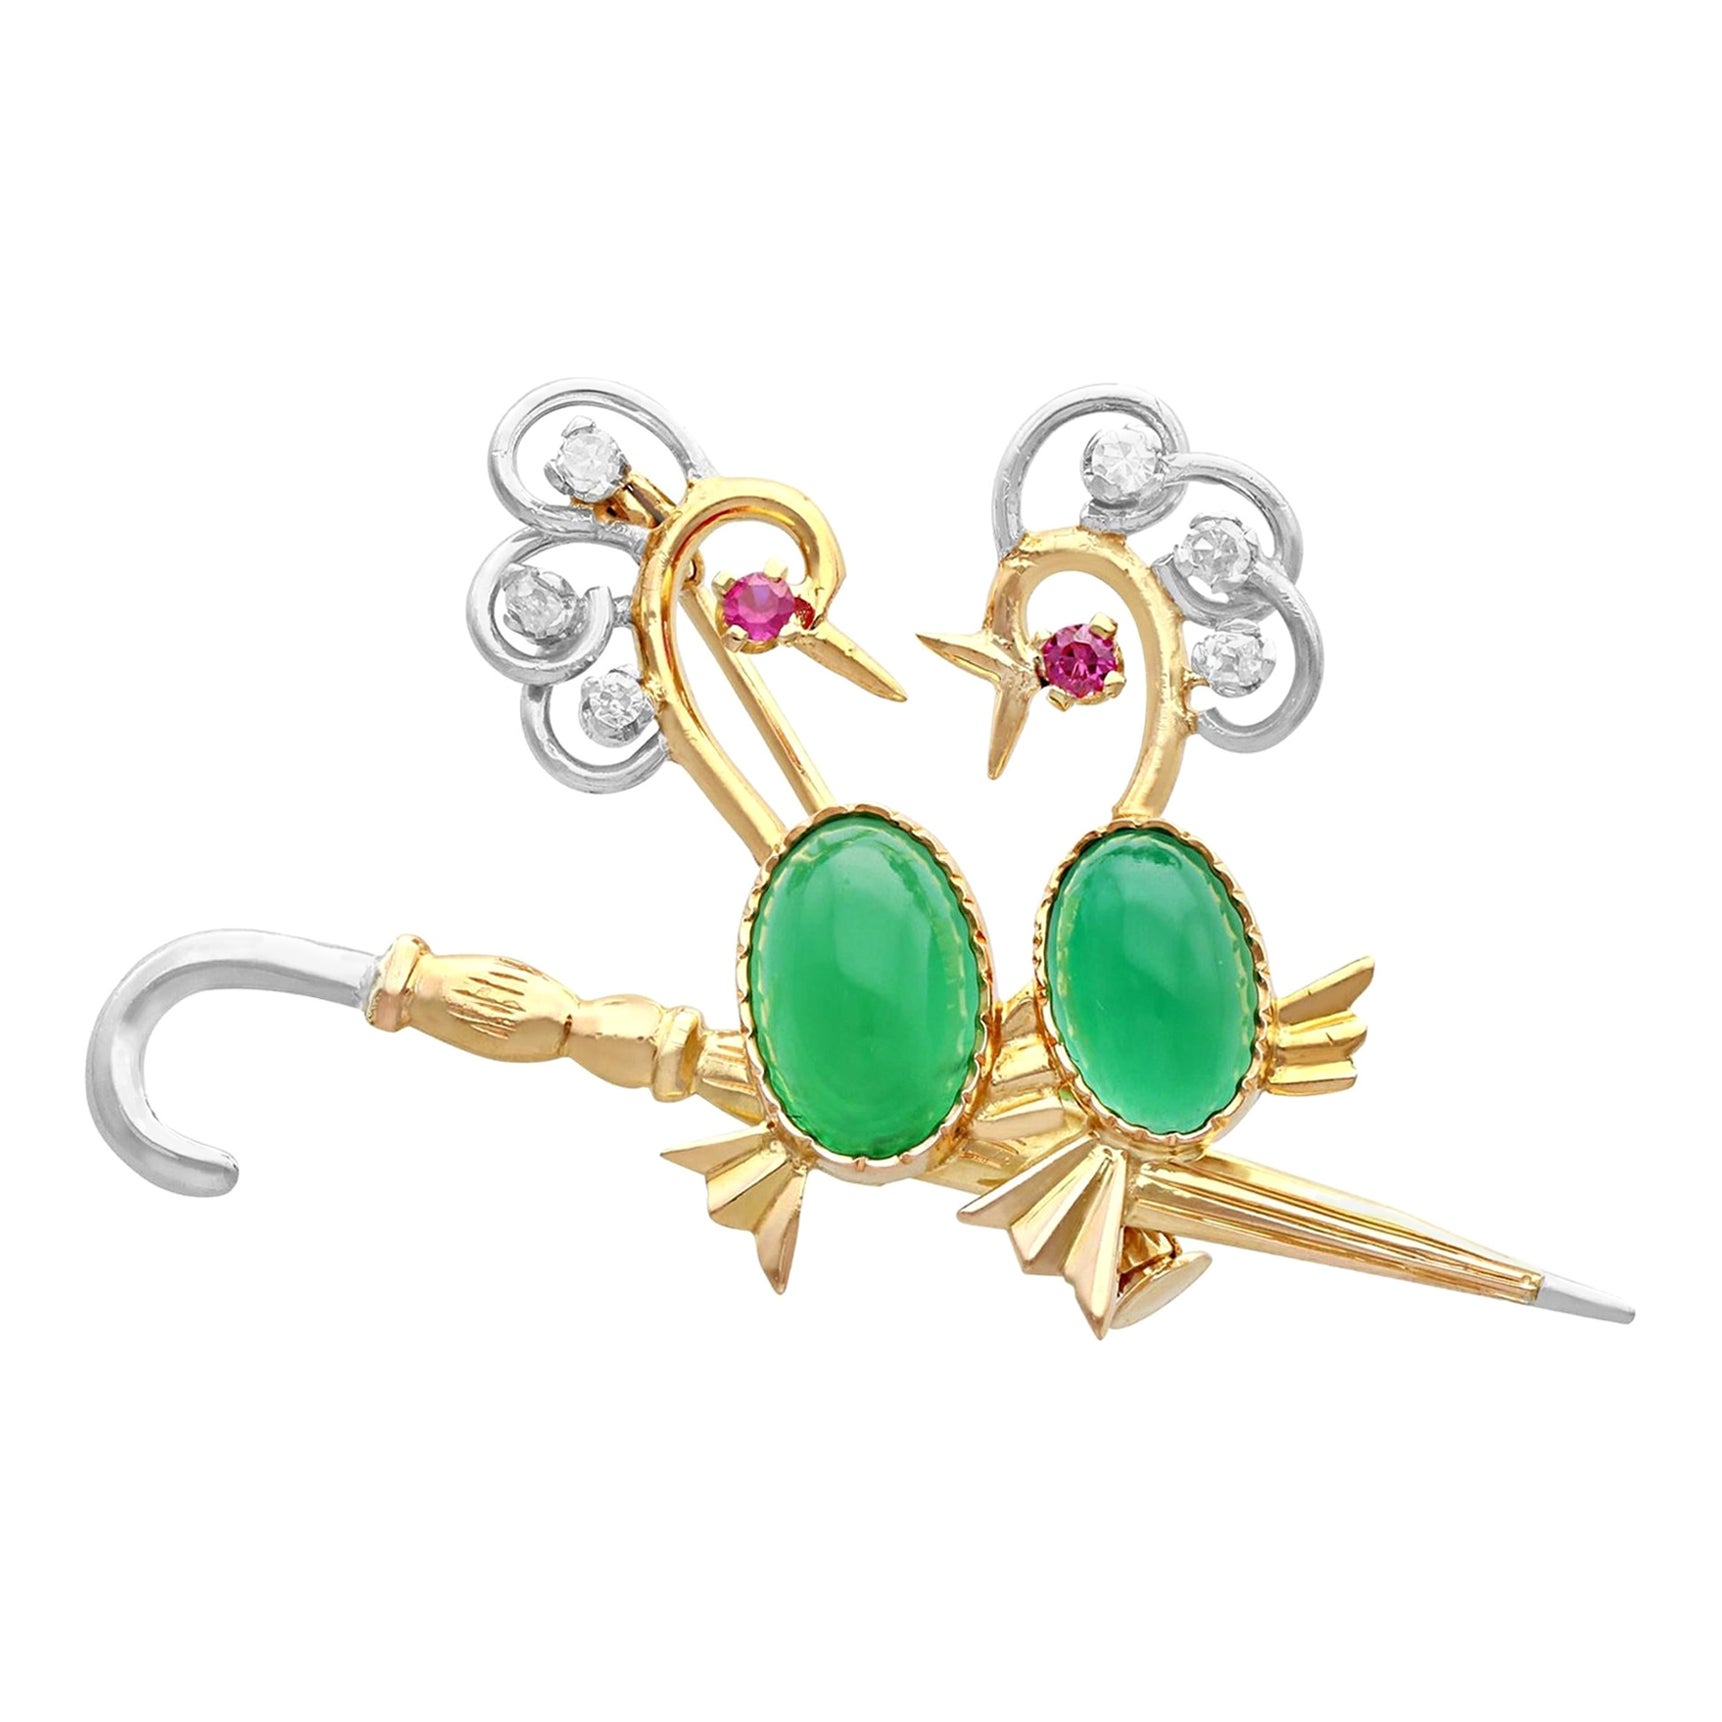 2.71 Carat Cabochon Cut Chrysoprase Diamond and Ruby 18k Yellow Gold Brooch For Sale